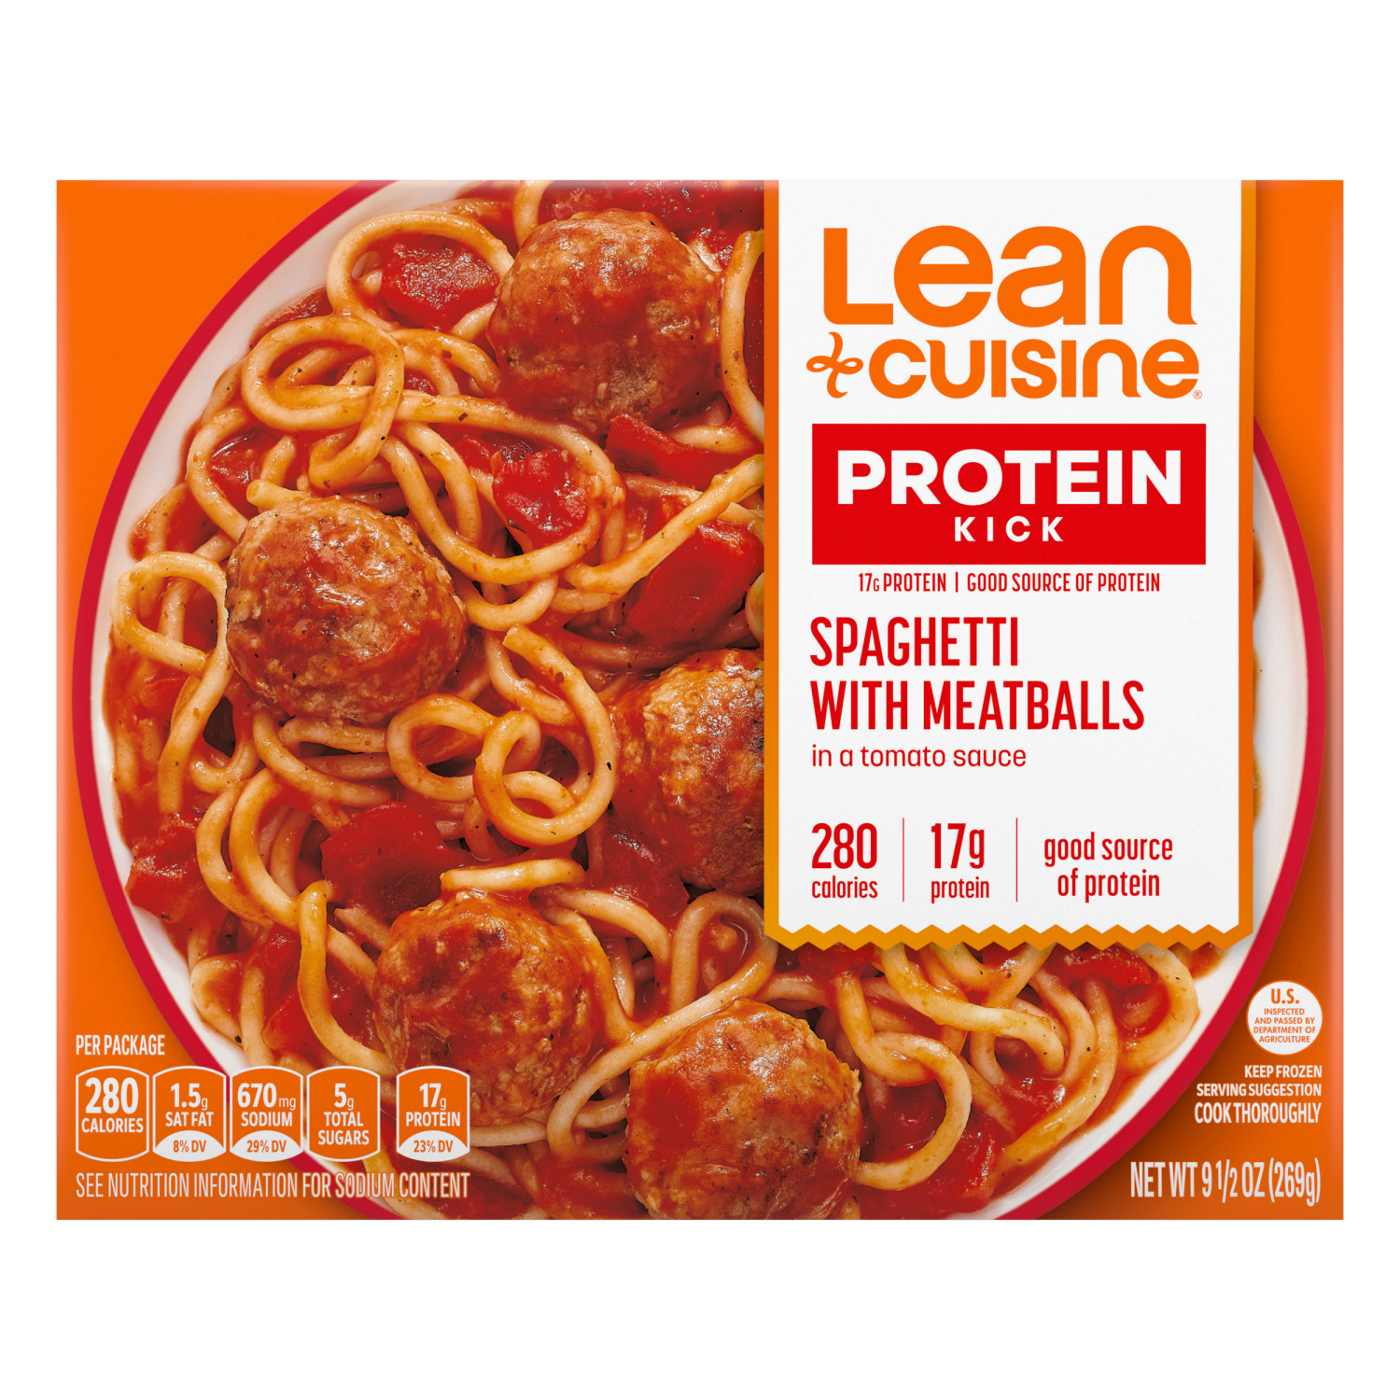 Lean Cuisine 17g Protein Spaghetti & Meatballs Frozen Meal; image 1 of 7